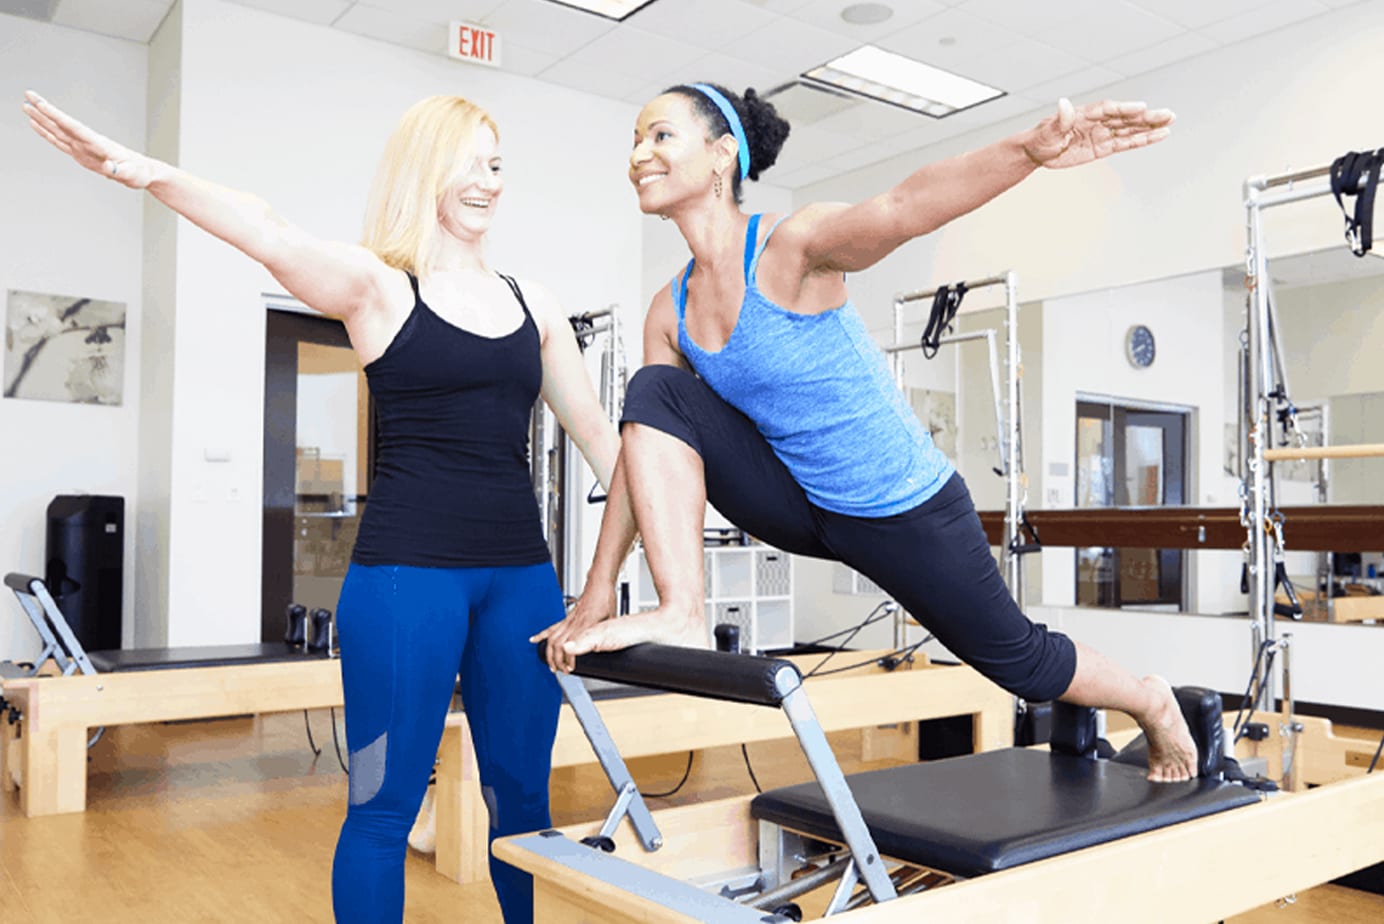 Private Pilates - RWJ RAHWAY FITNESS & WELLNESS